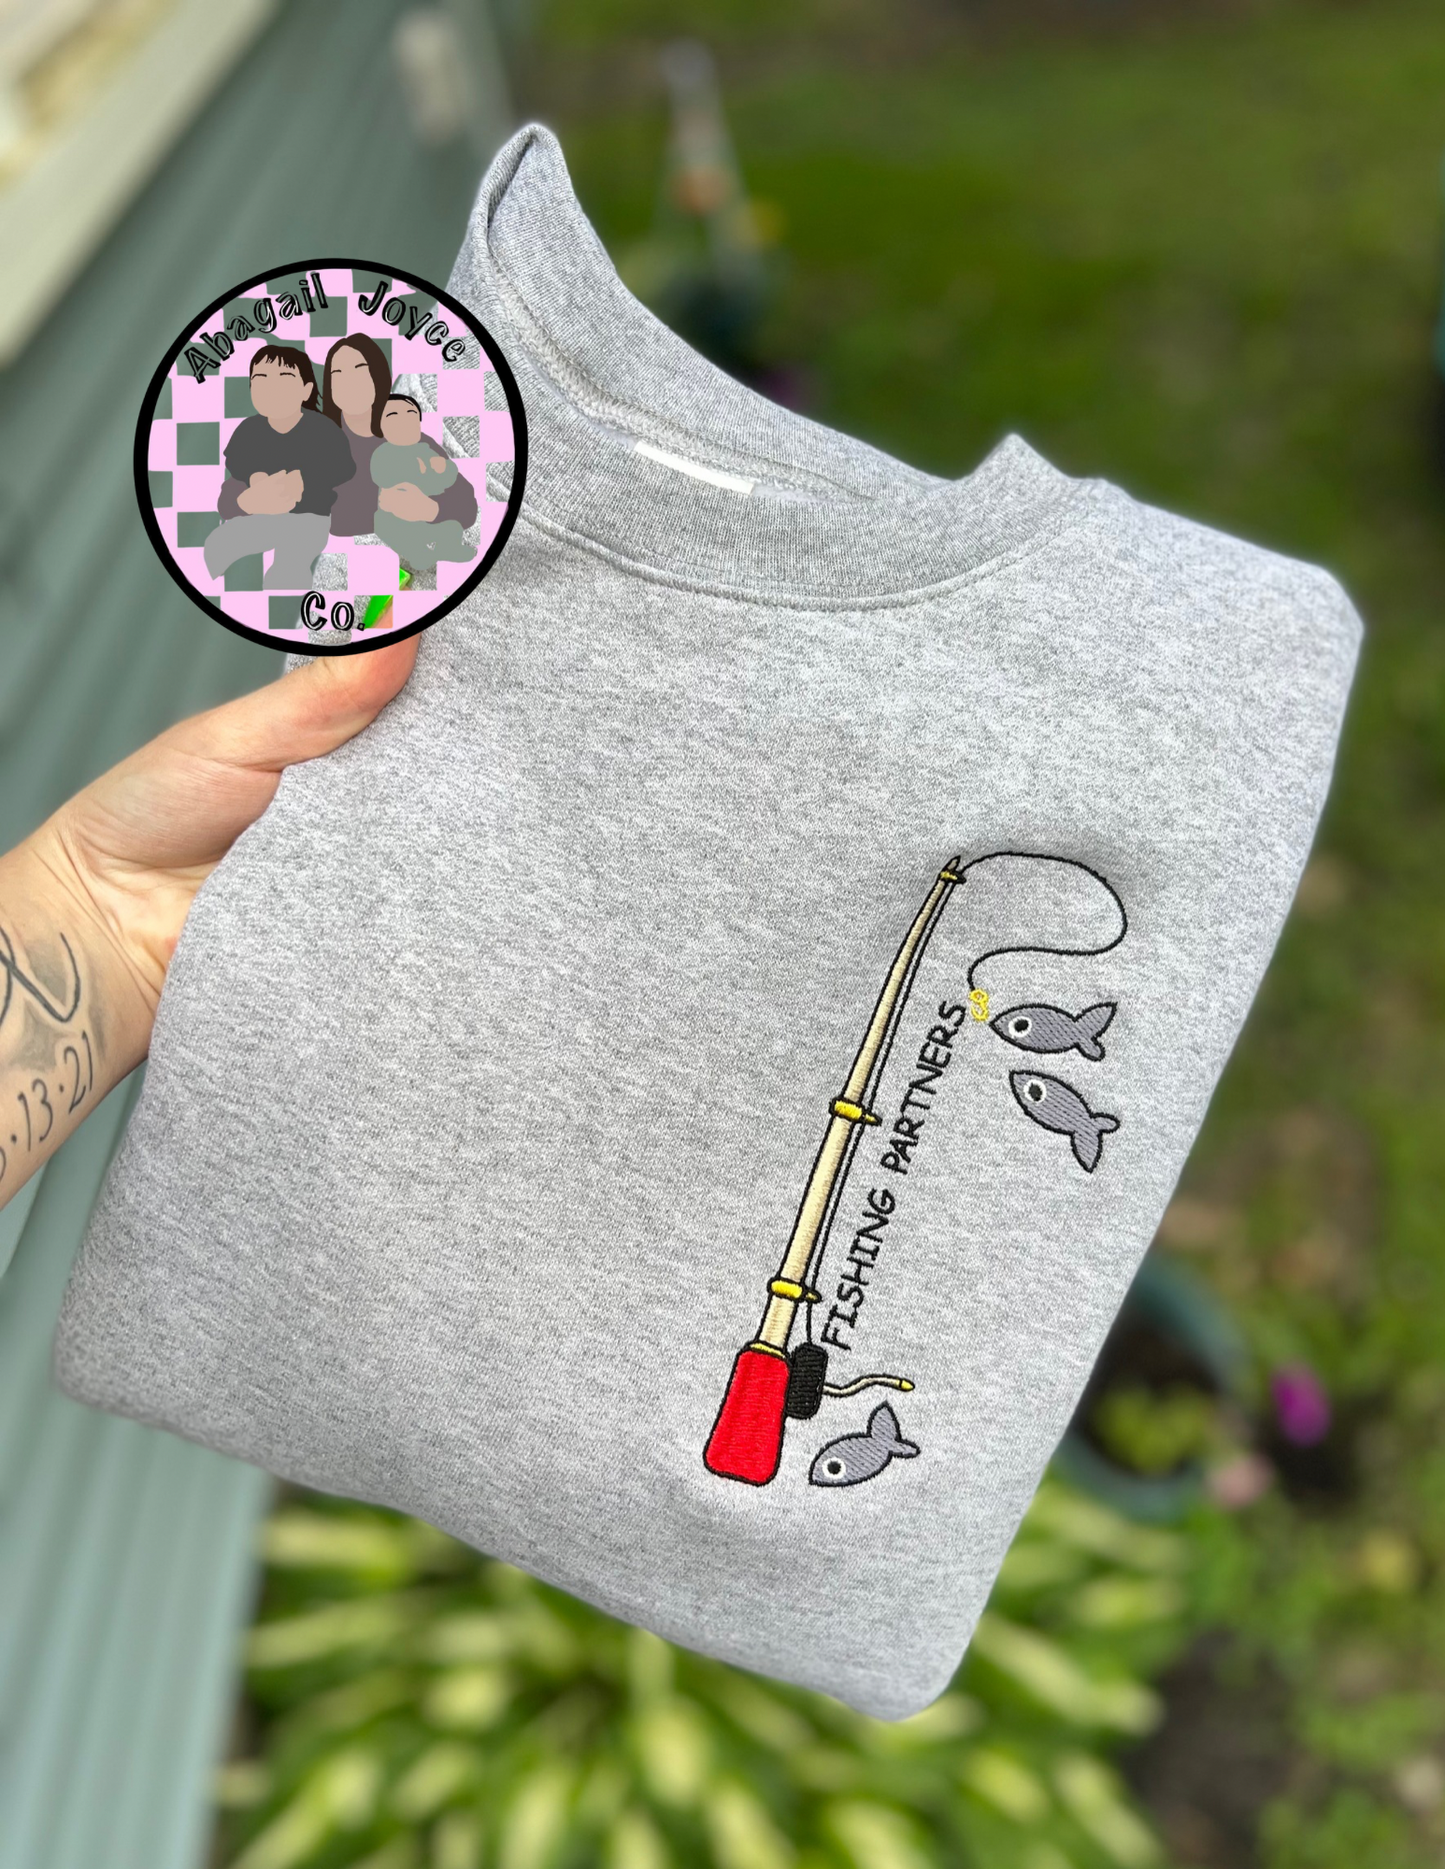 Fishing partners 🎣embroidered crew preorder 28 business day turn around time